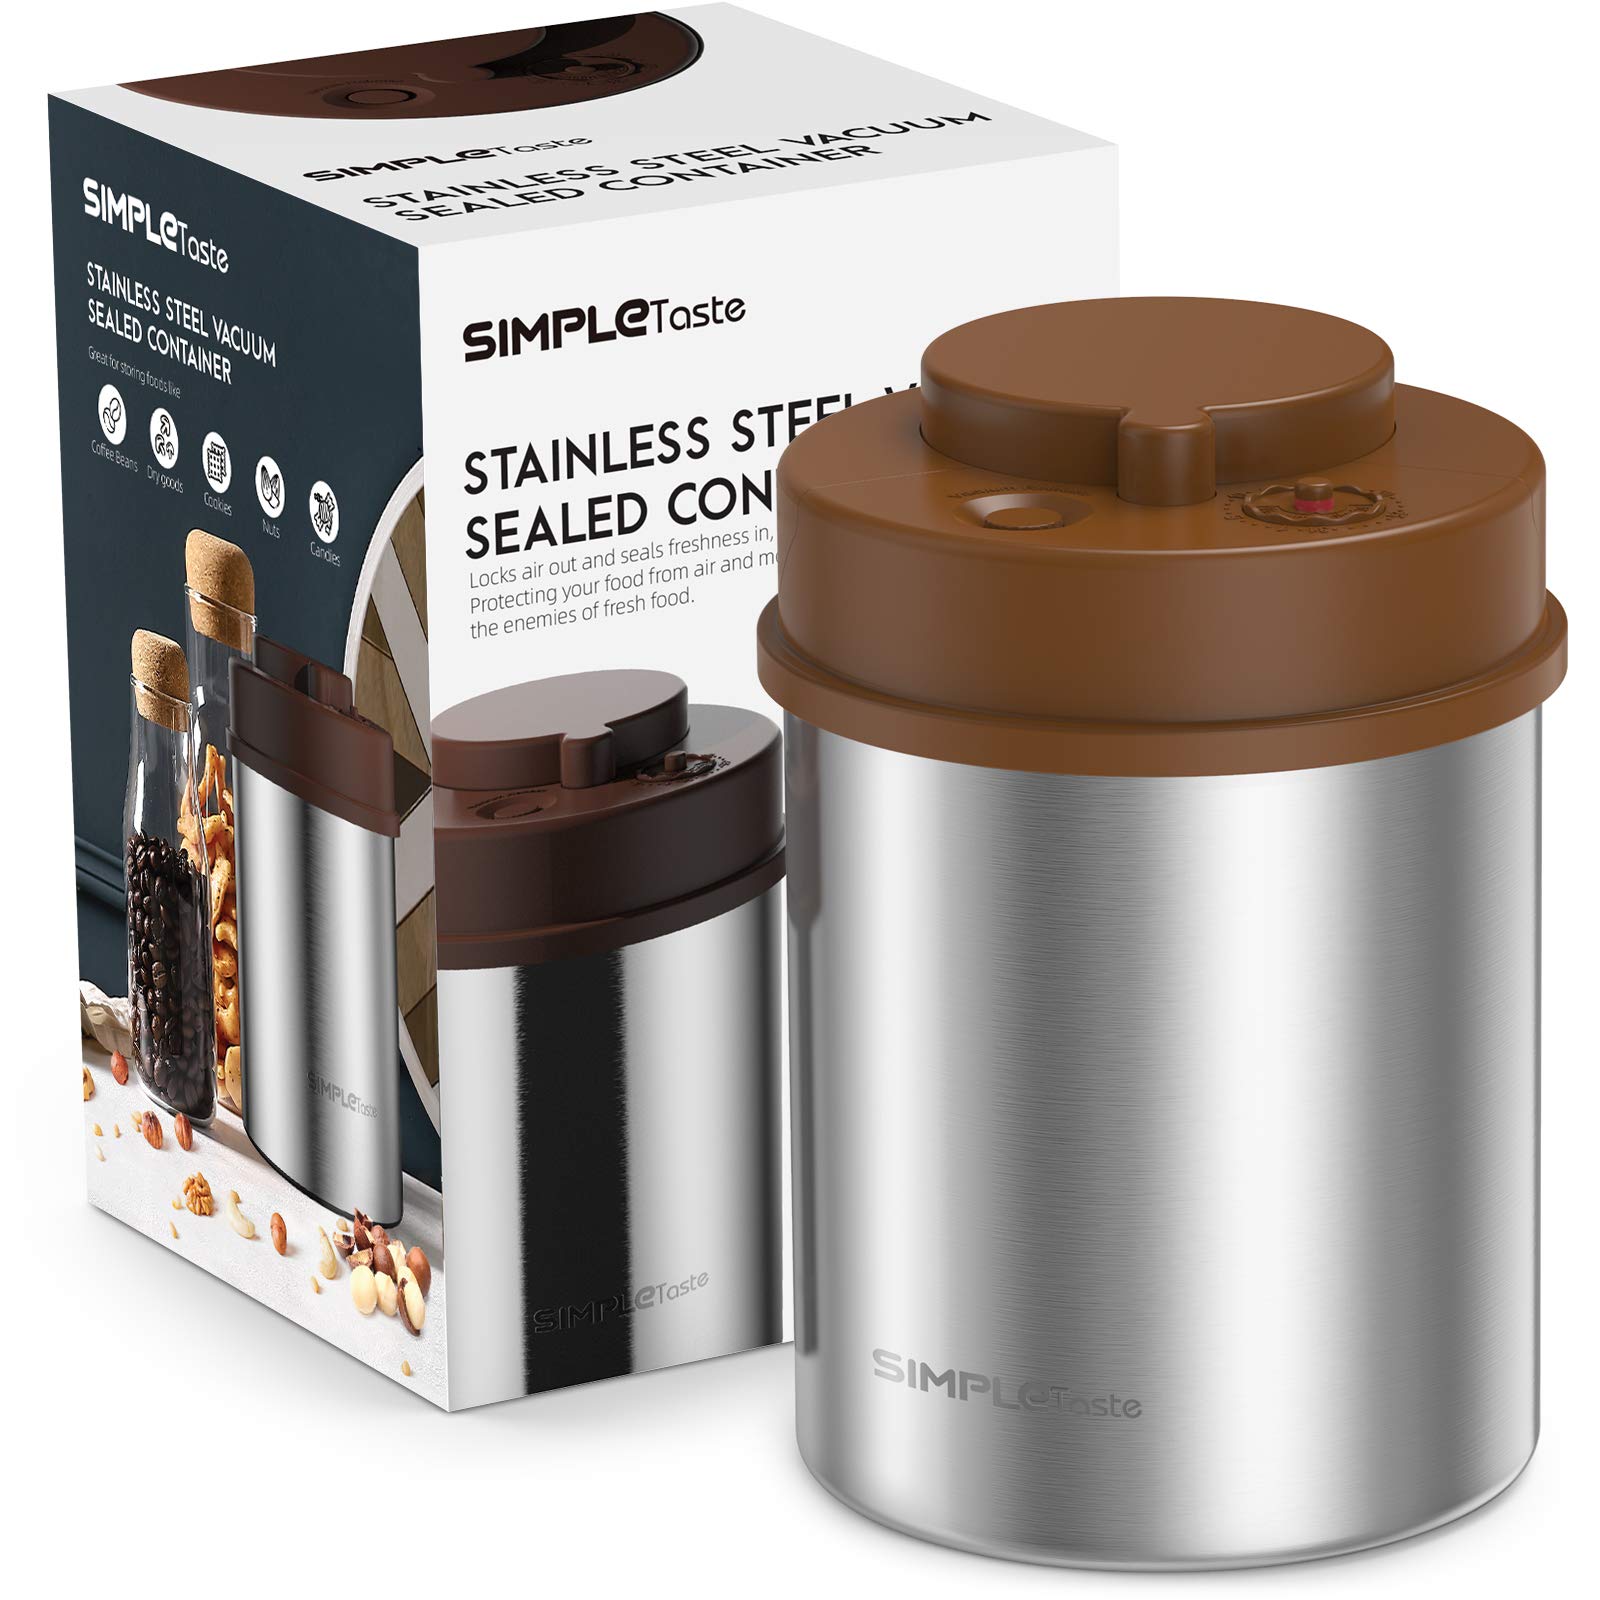 Vacuum Sealed Storage Container, Manual Pump Lid, Airtight Stainless Steel Kitchen Coffee Food Jar $7